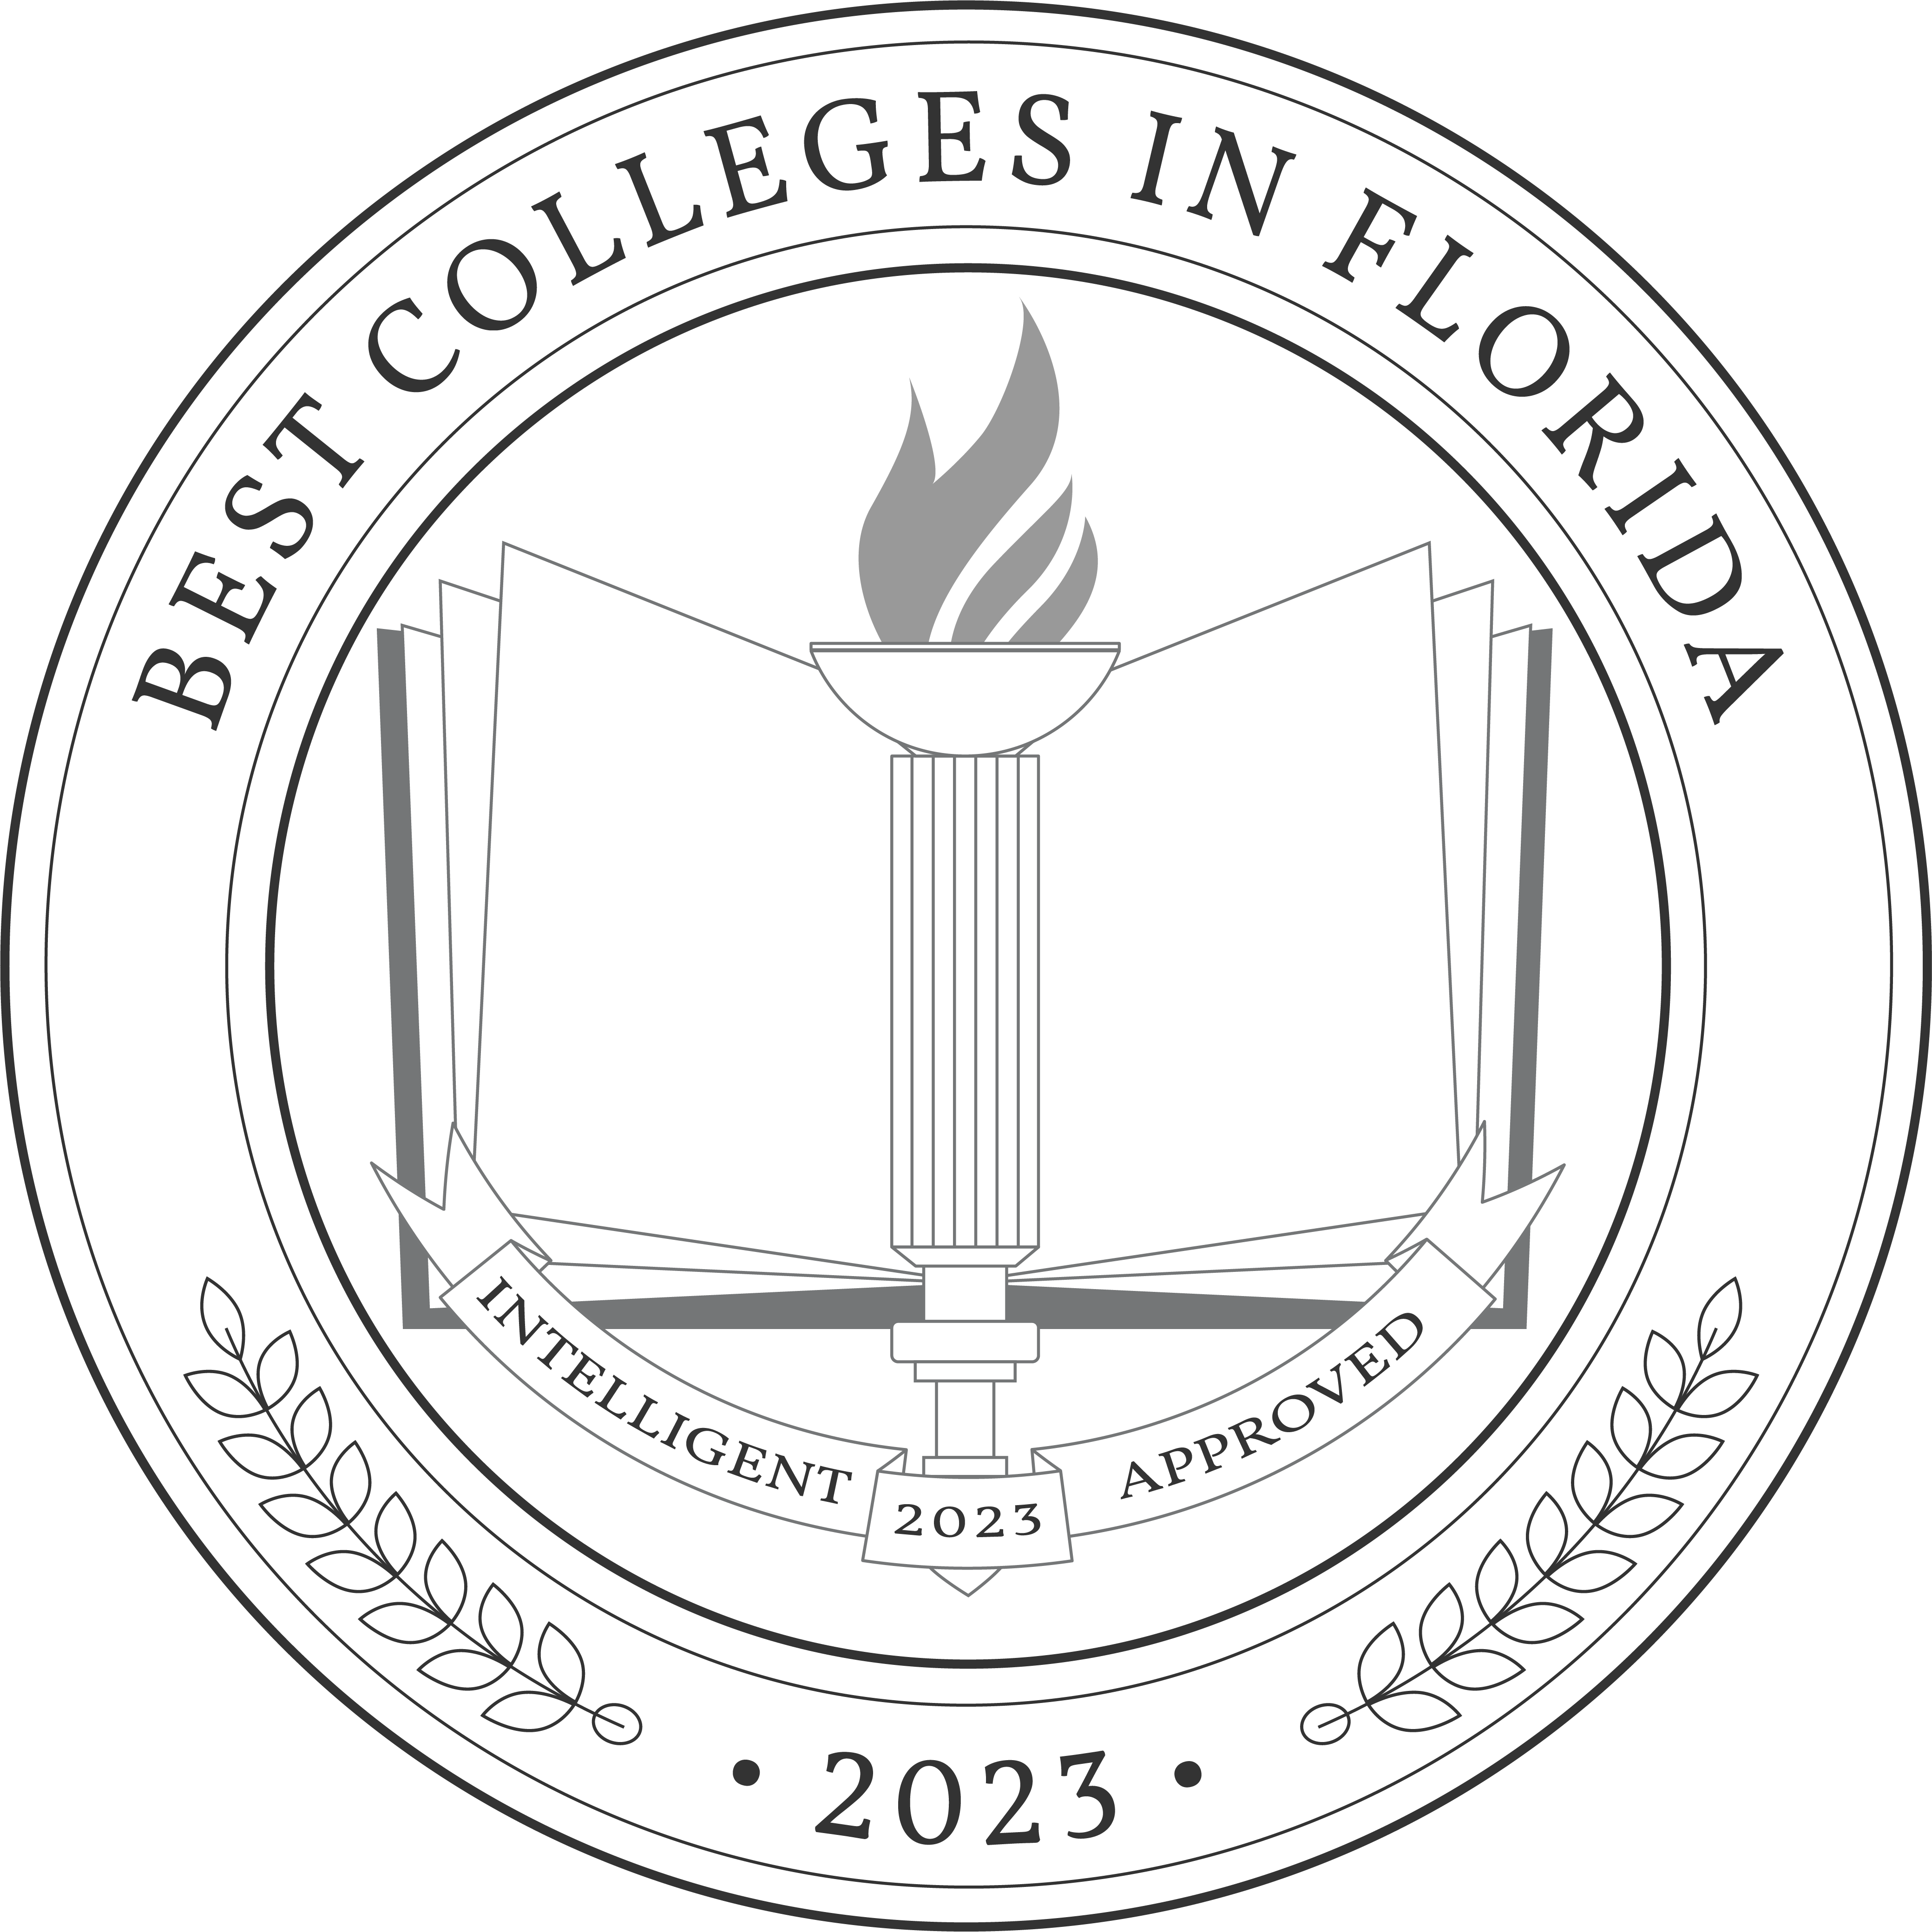 An official seal provided by Intelligent.com which recognizes Jacksonville University as one of the best colleges in Florida for 2023